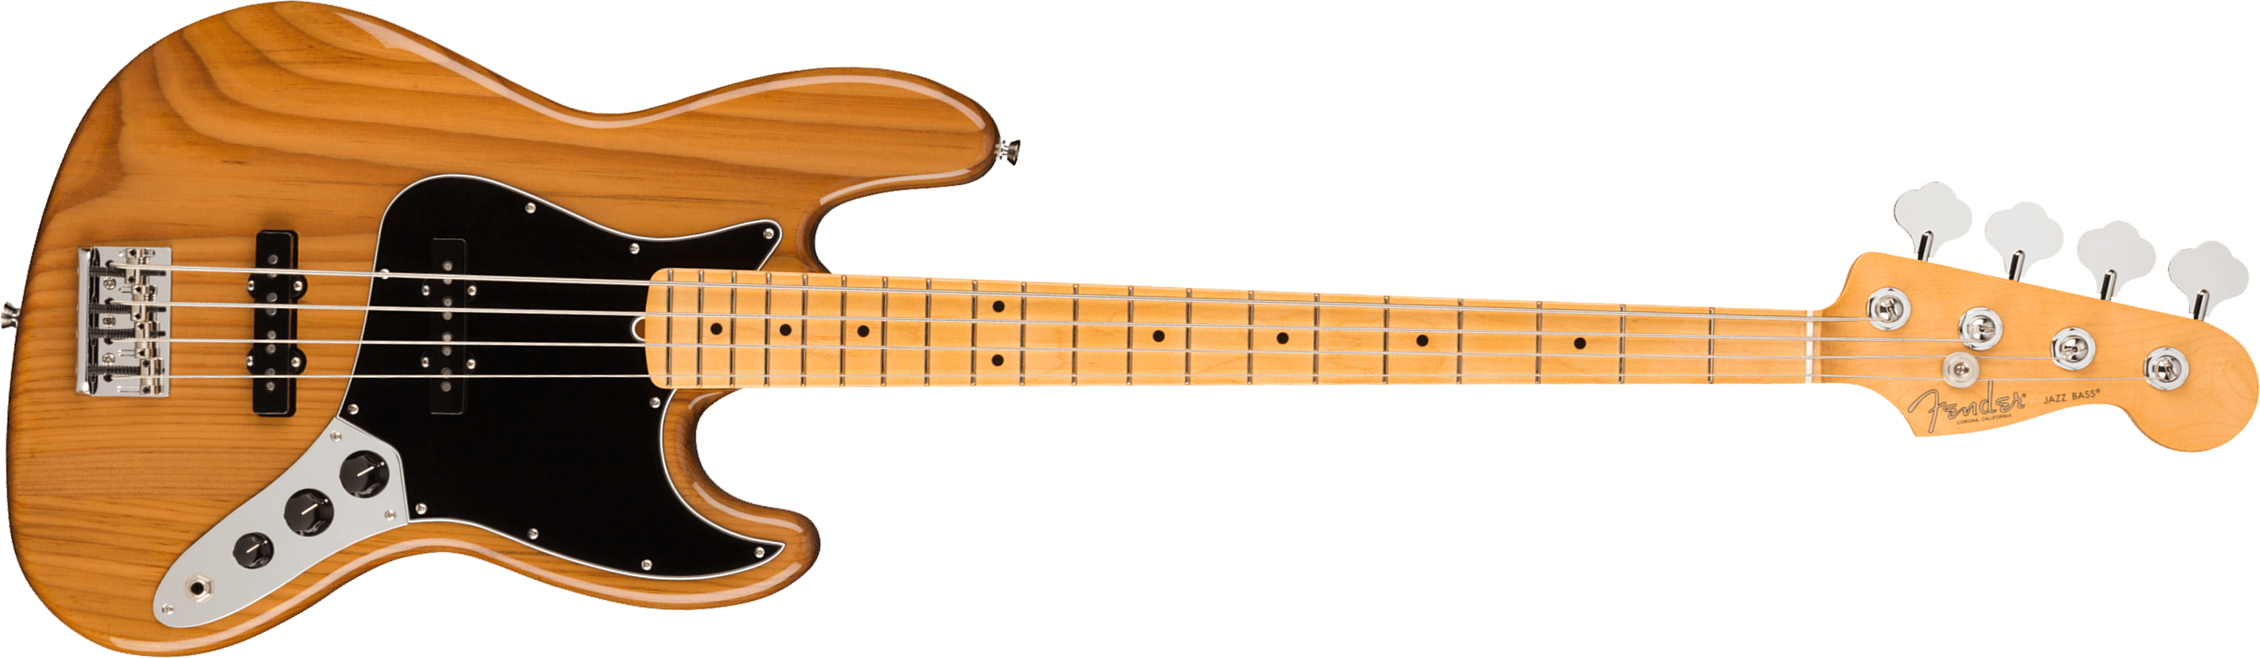 Fender Jazz Bass American Professional Ii Usa Mn - Roasted Pine - Solid body elektrische bas - Main picture